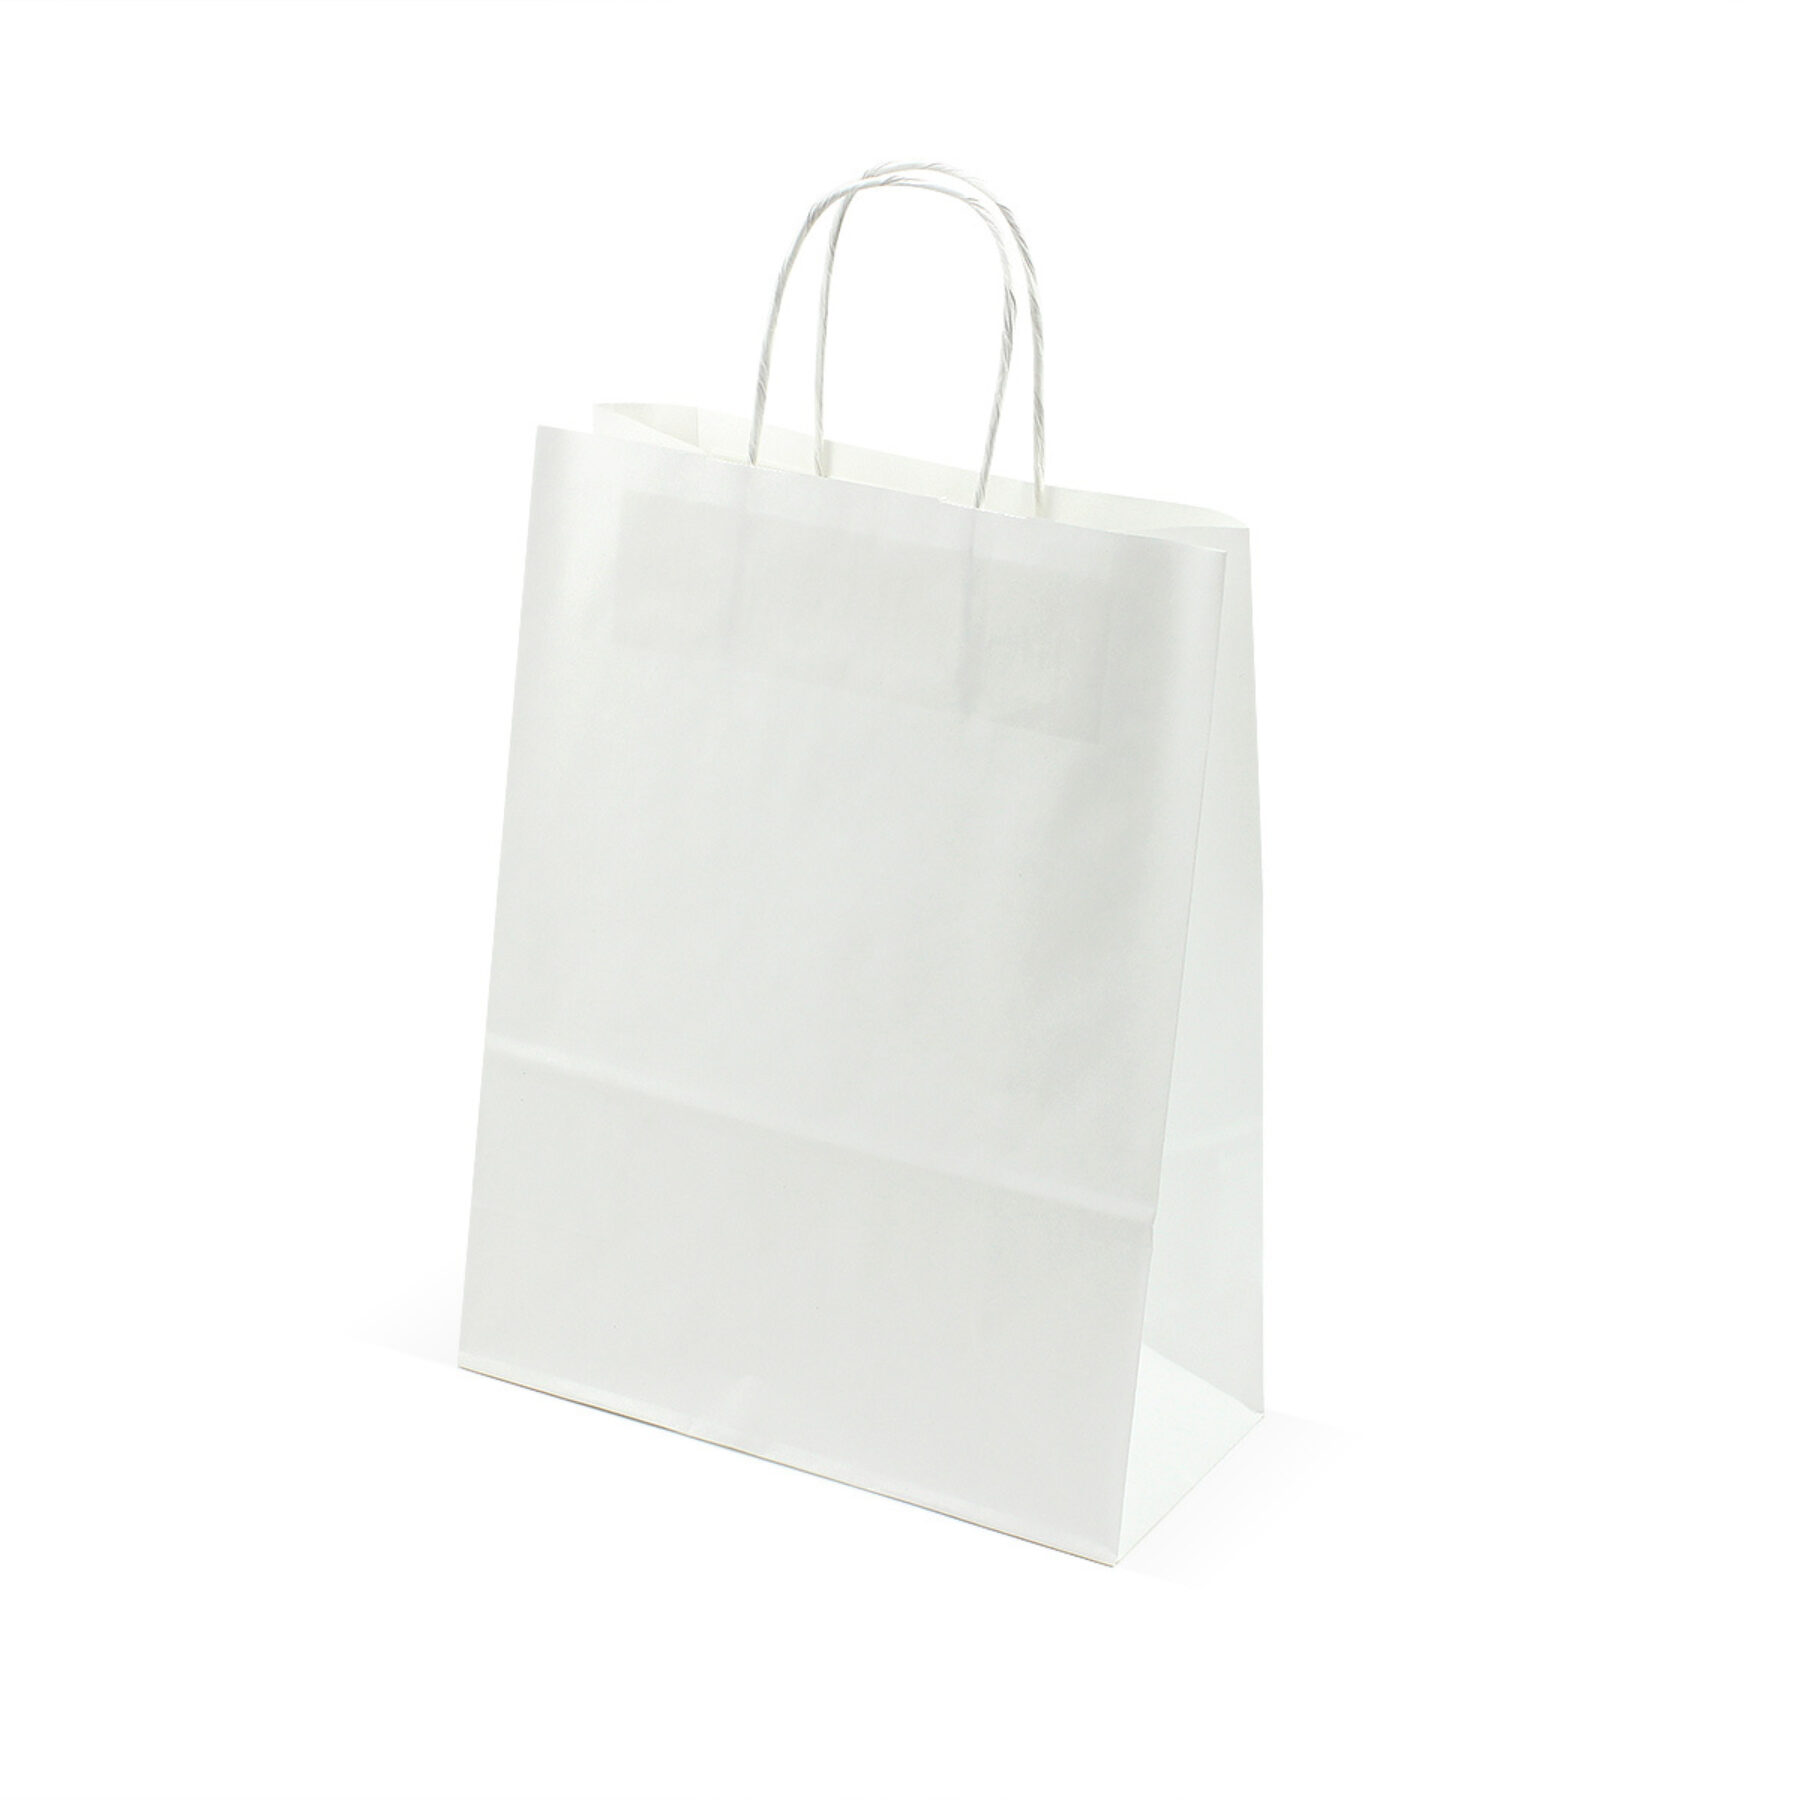 Paper Carrier Bag (20pcs) with Twisted Handles - White - Image 1